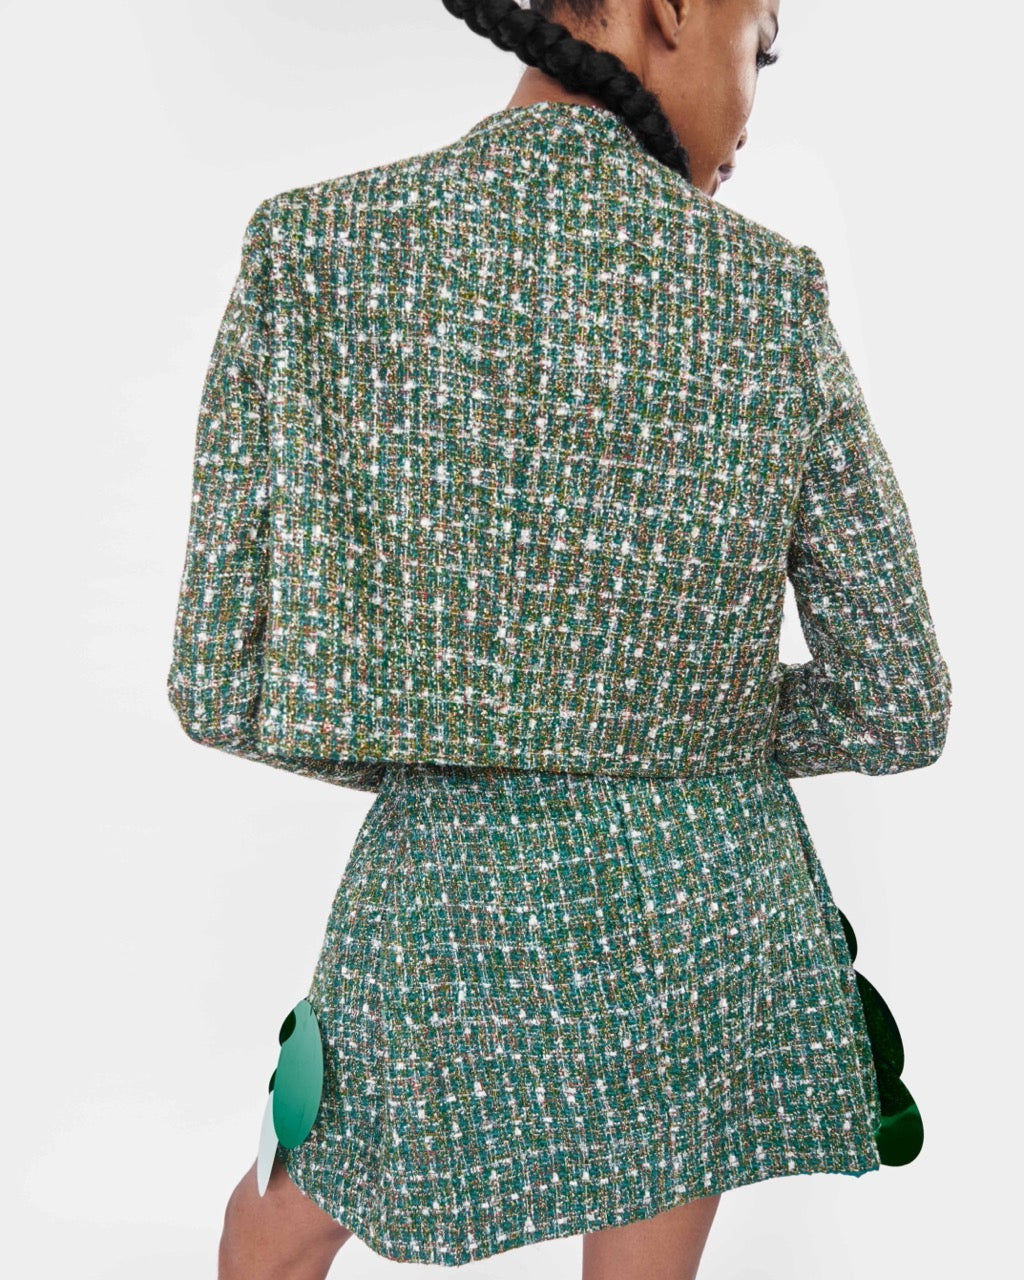 The back of a model wearing a Green long sleeve jacket and a Green mini skirt with sequins embellishment